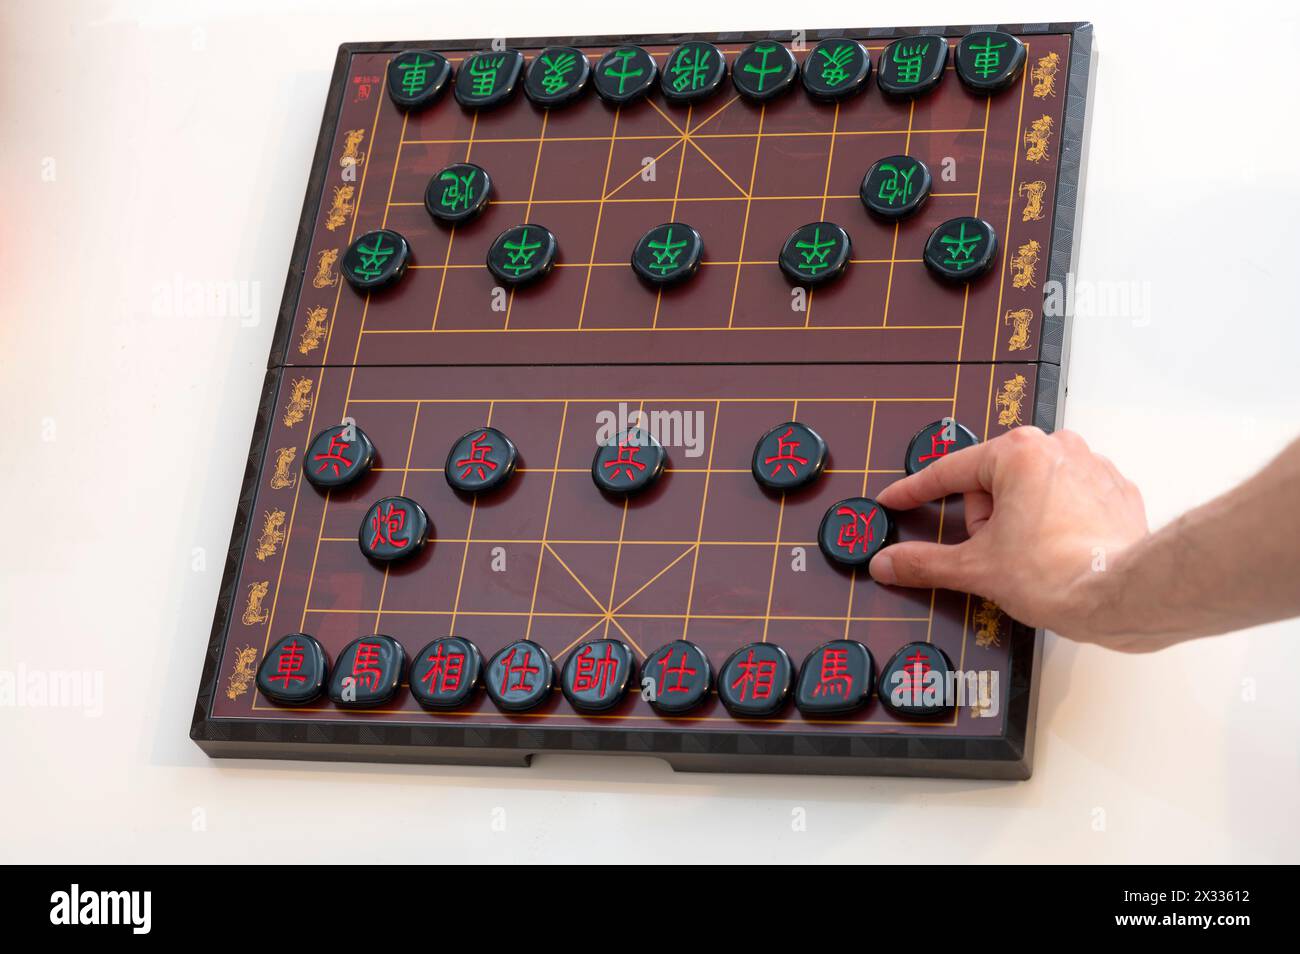 View of a Xiangqi board (Chinese chess) with a hand at the cannon piece Stock Photo